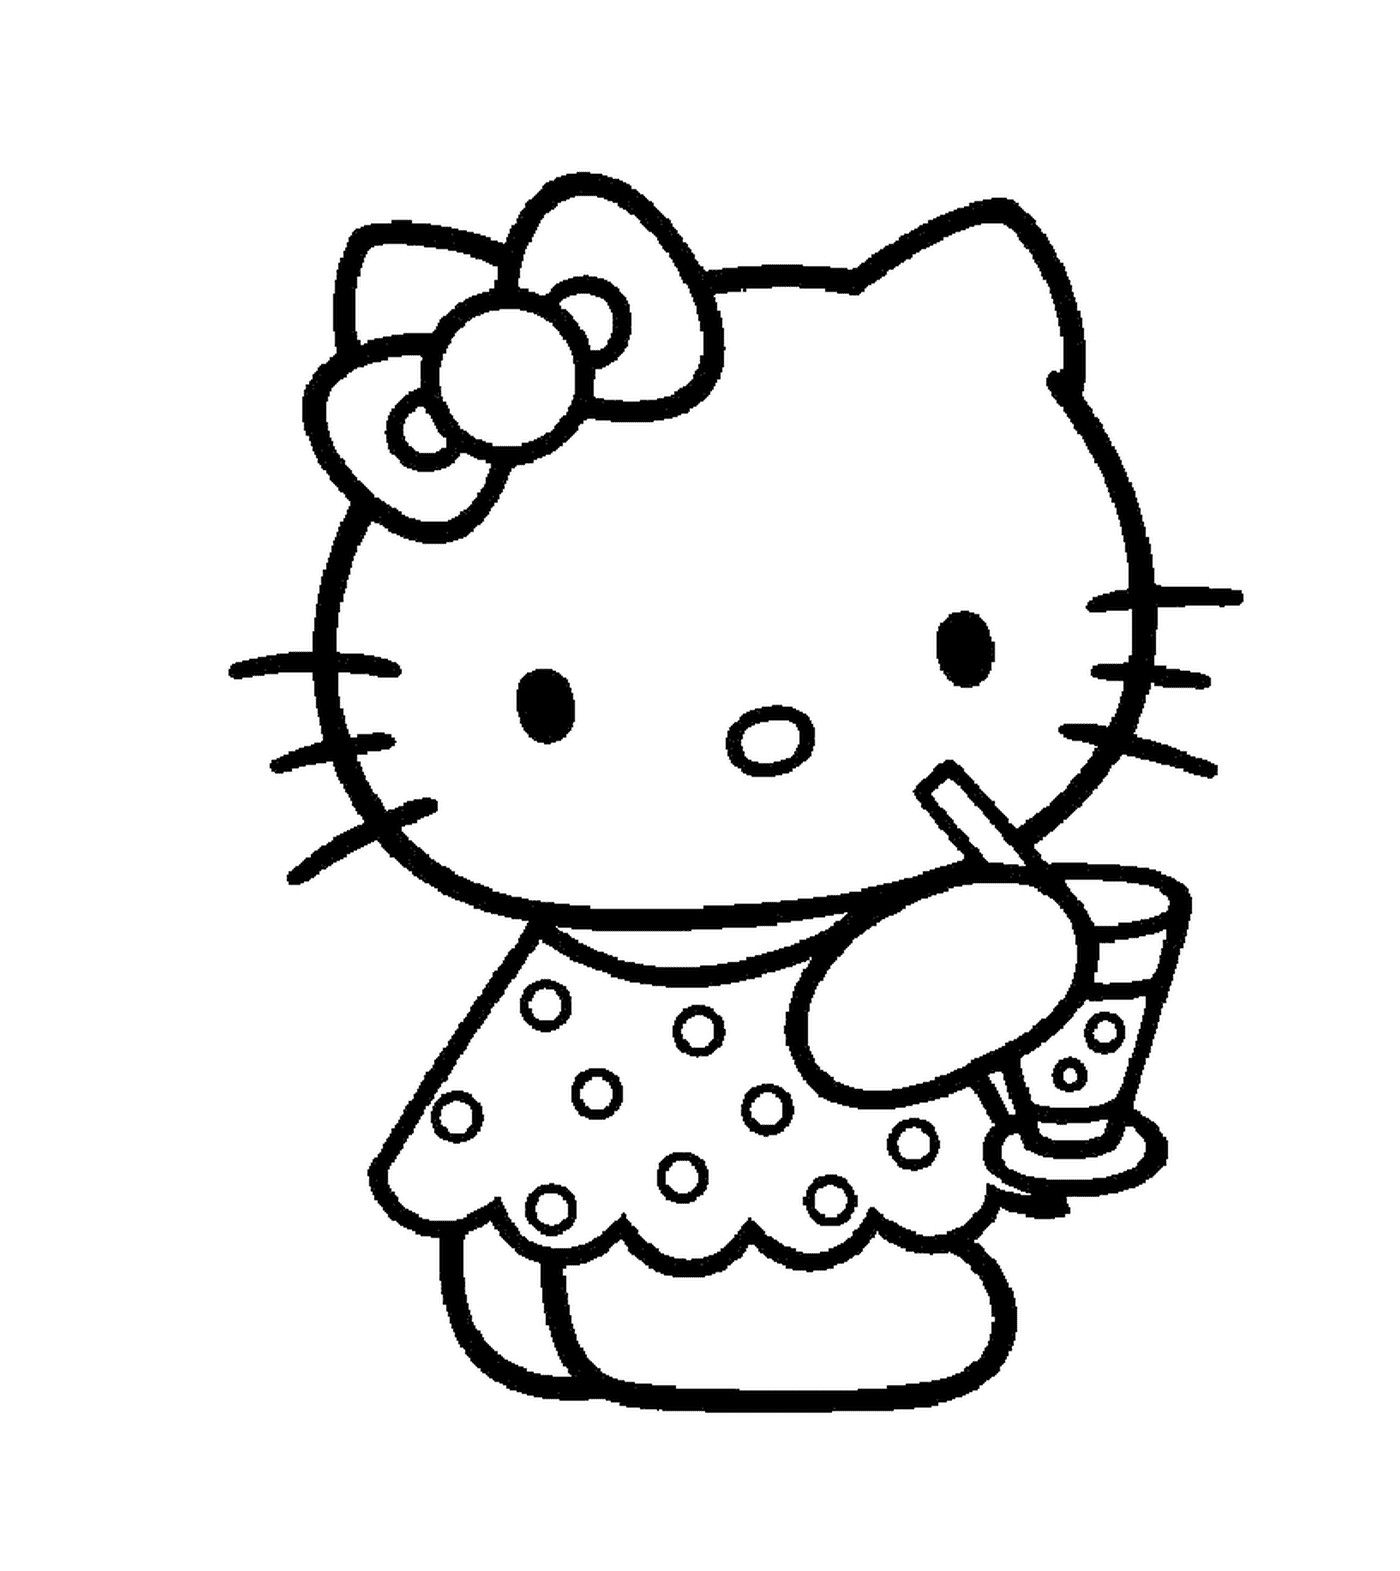  Hello Kitty holding a drink 